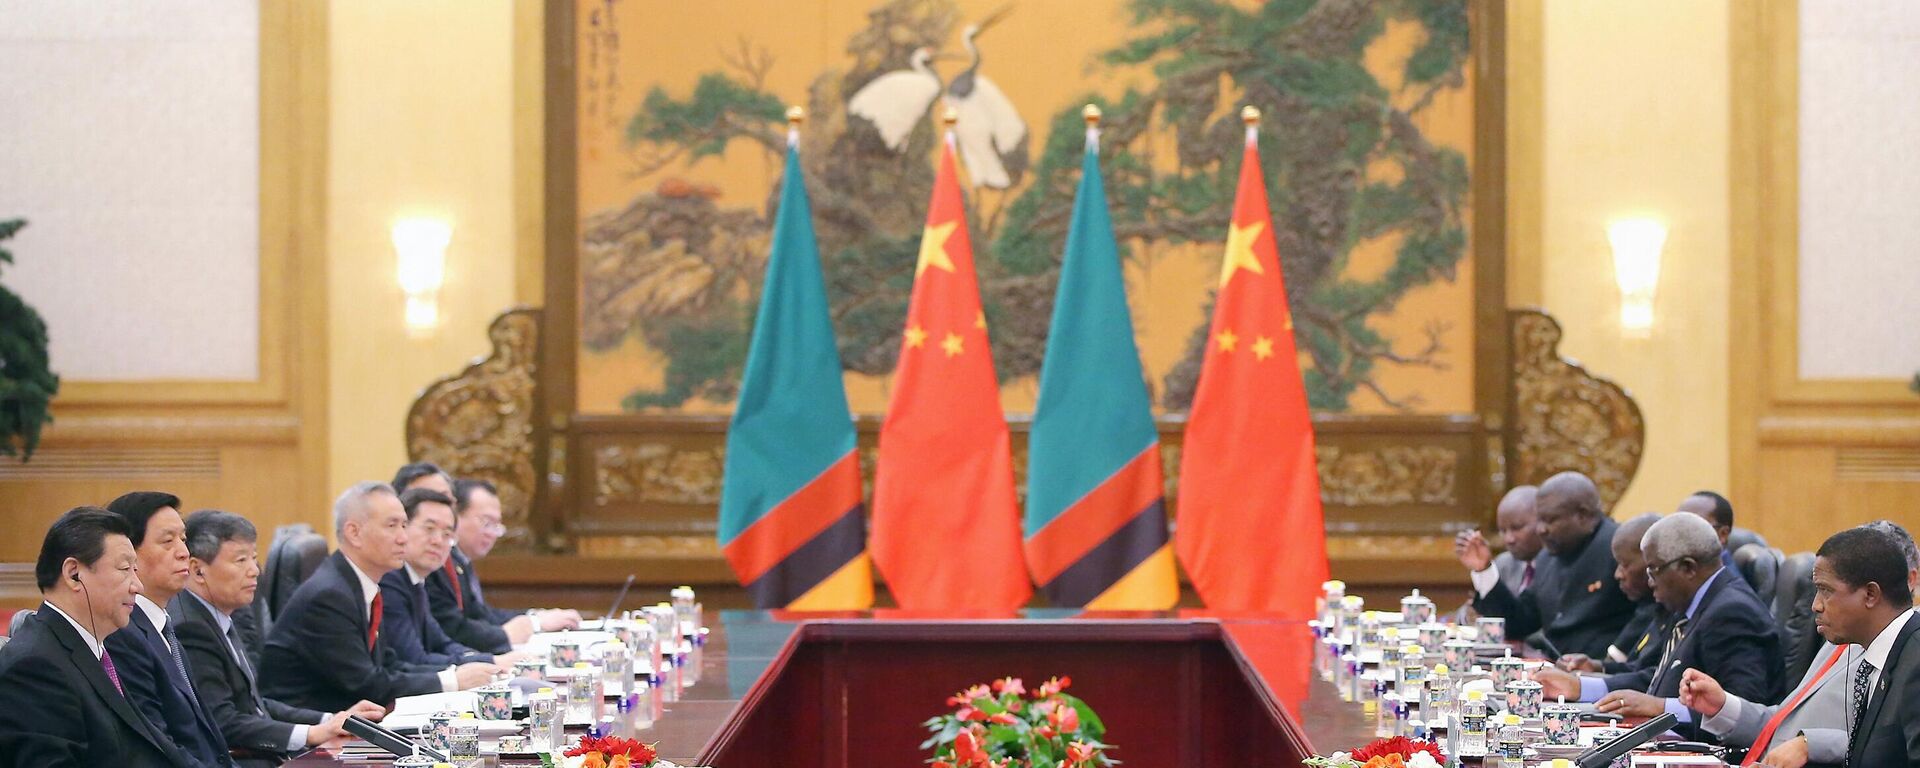 Chinese President Xi Jinping (L) meets with Zambian President Edgar Chagwa Lungu (R) at the Great Hall of the People in Beijing on March 30, 2015. - Sputnik International, 1920, 24.01.2023